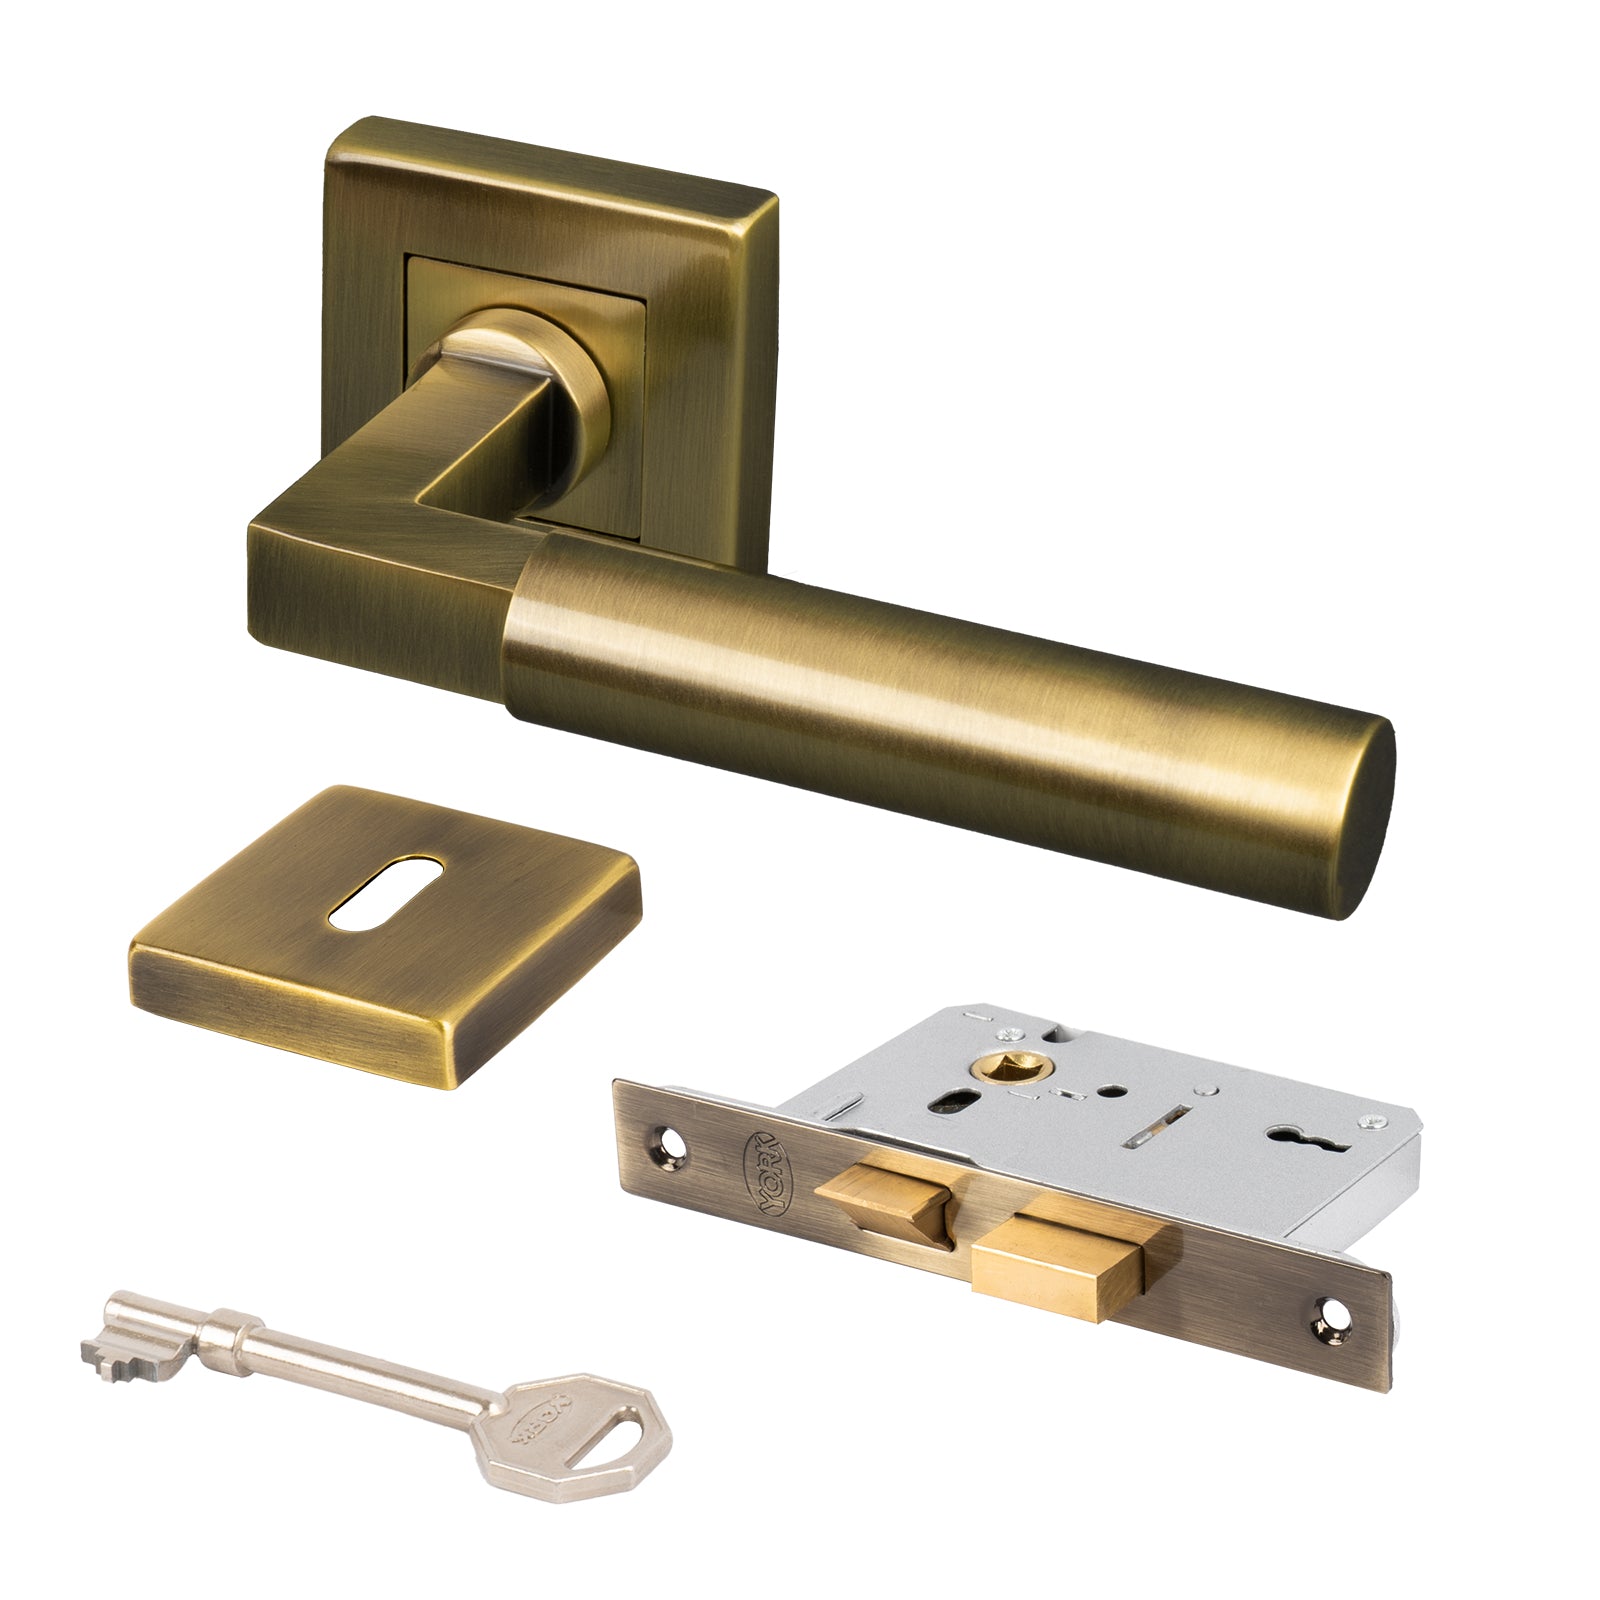 Bauhaus handle 3 lever lock set with keyhole cover